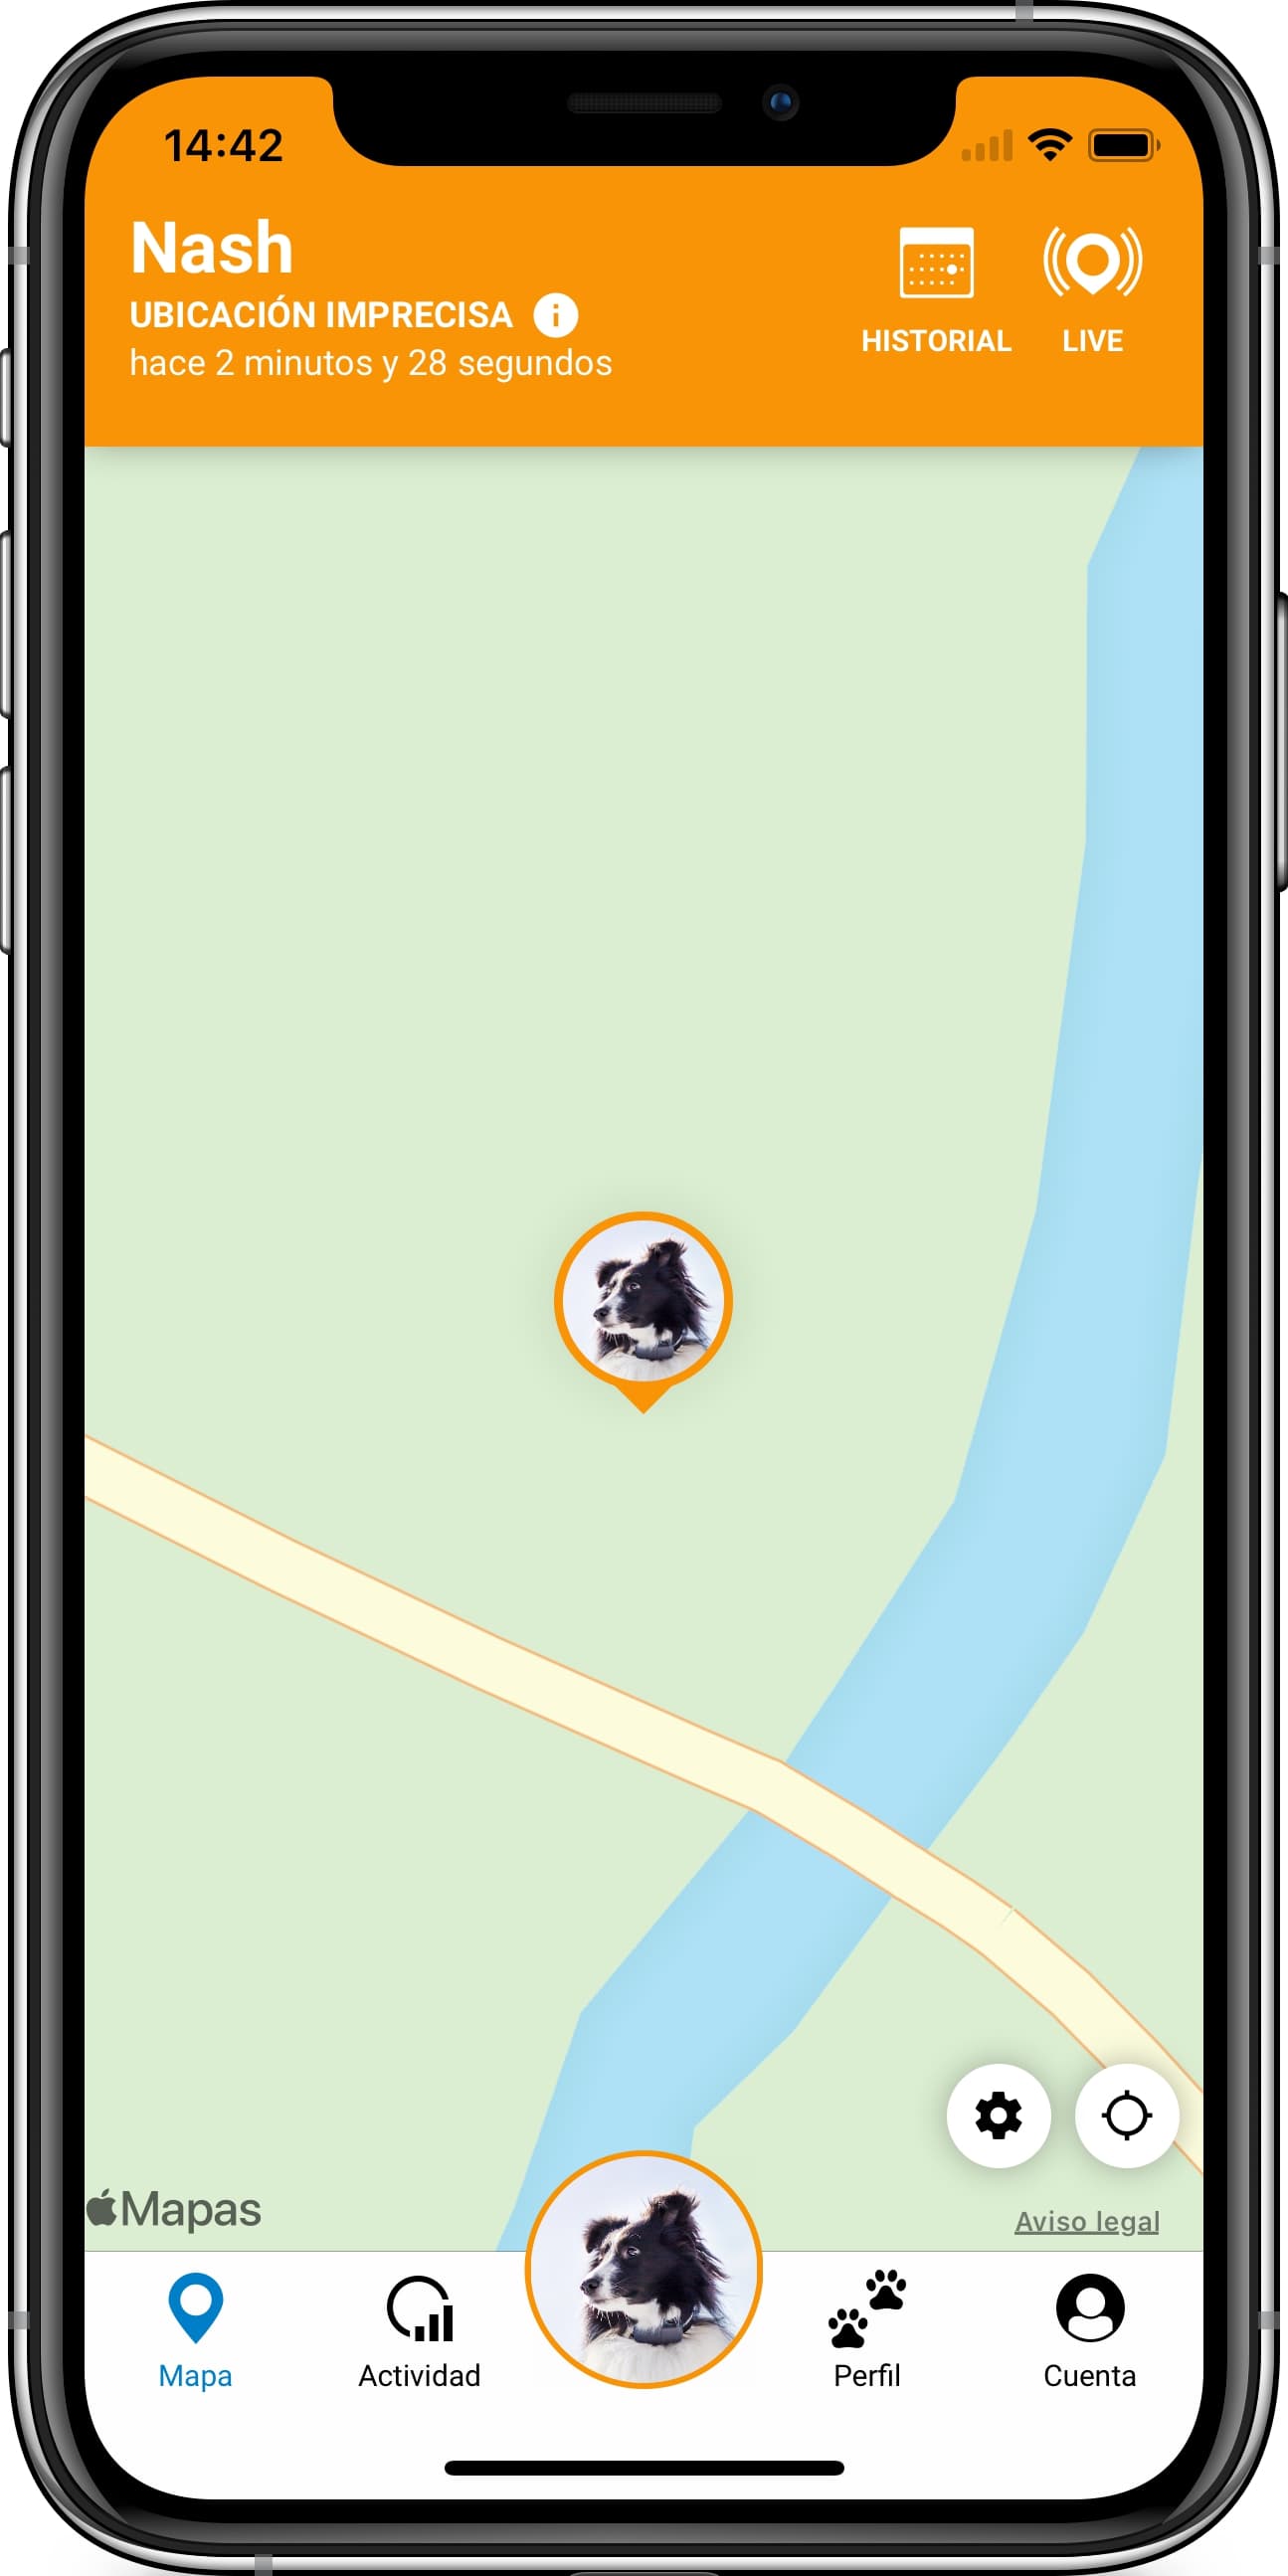 iPhone_11_Pro-Nash_-_Map_INACCURATE_POSITION__Screen_framed__4_.jpg